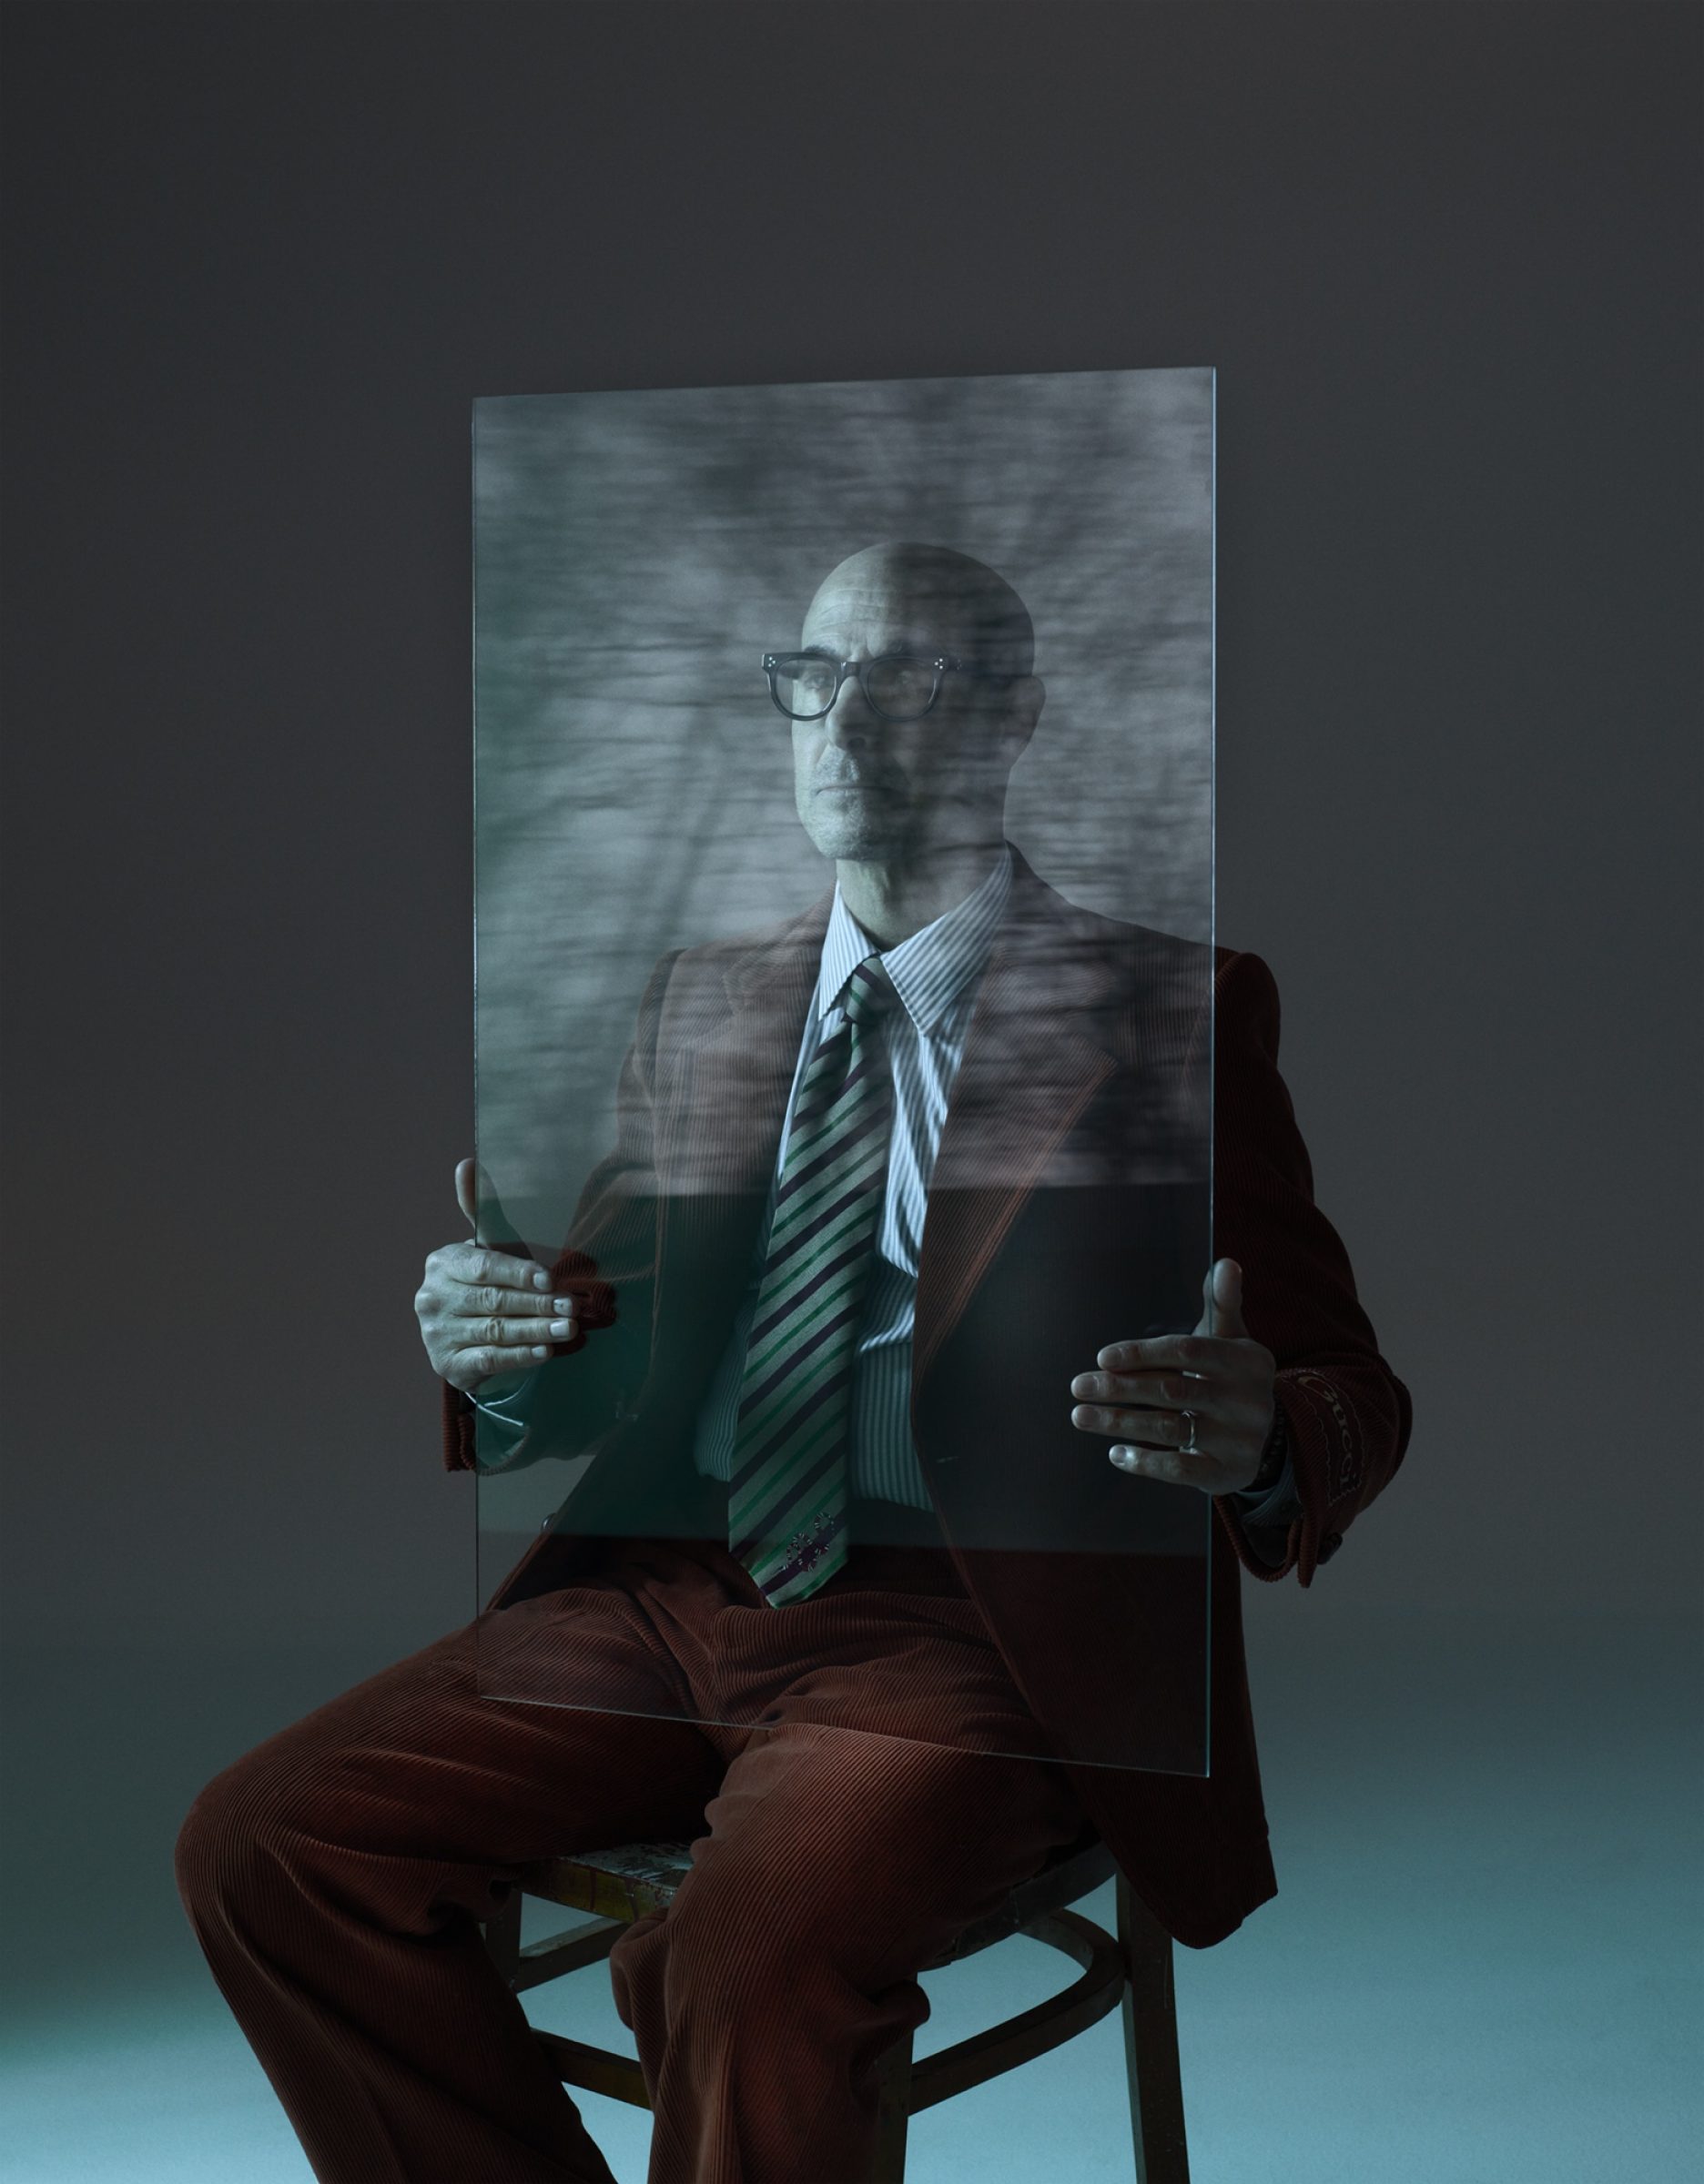 Actor Stanley Tucci sitting on a chair in a dark room, holding a glass panel in front of him